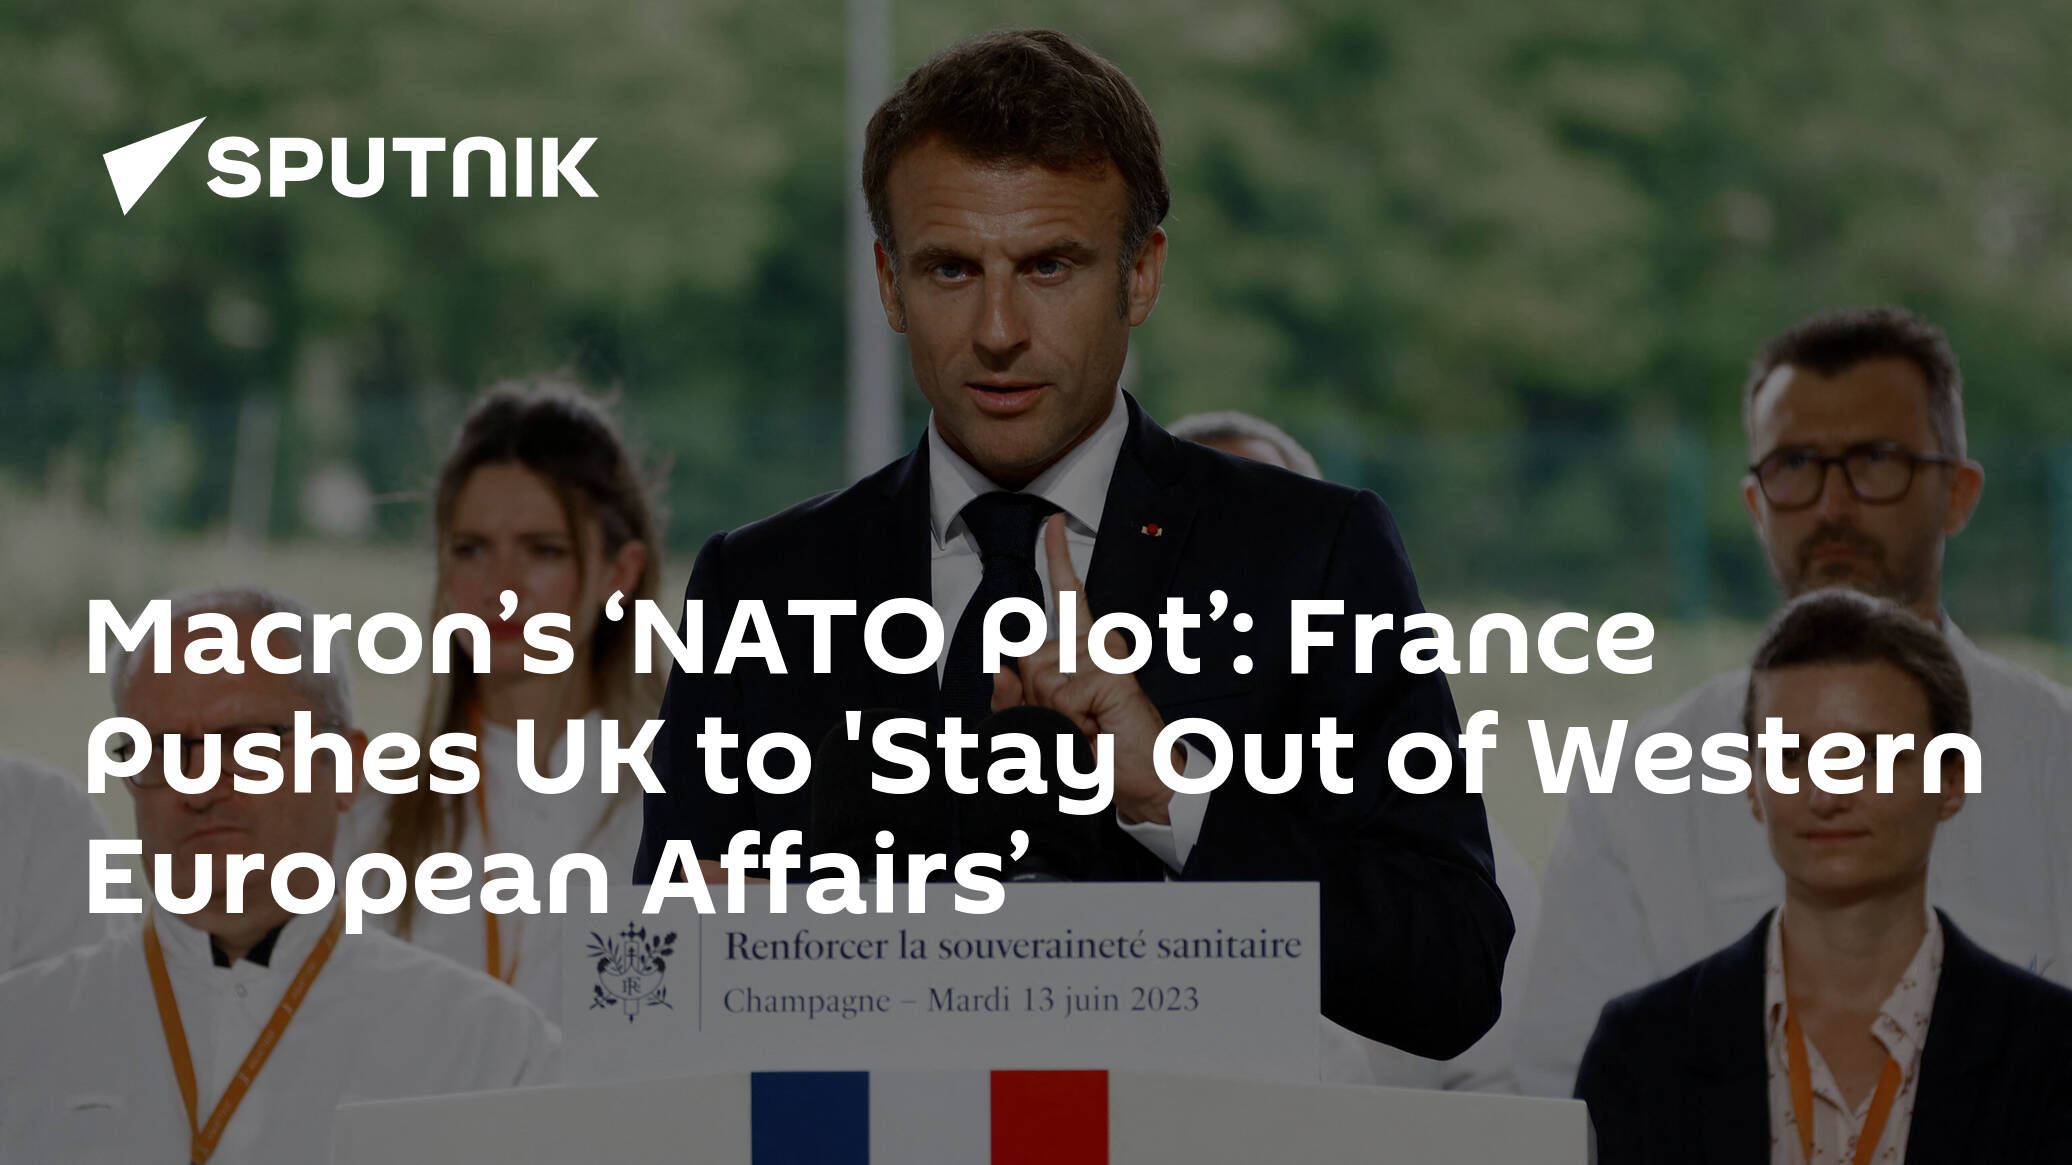 Macron’s ‘NATO Plot’: France Pushes UK to 'Stay Out of Western European Affairs’